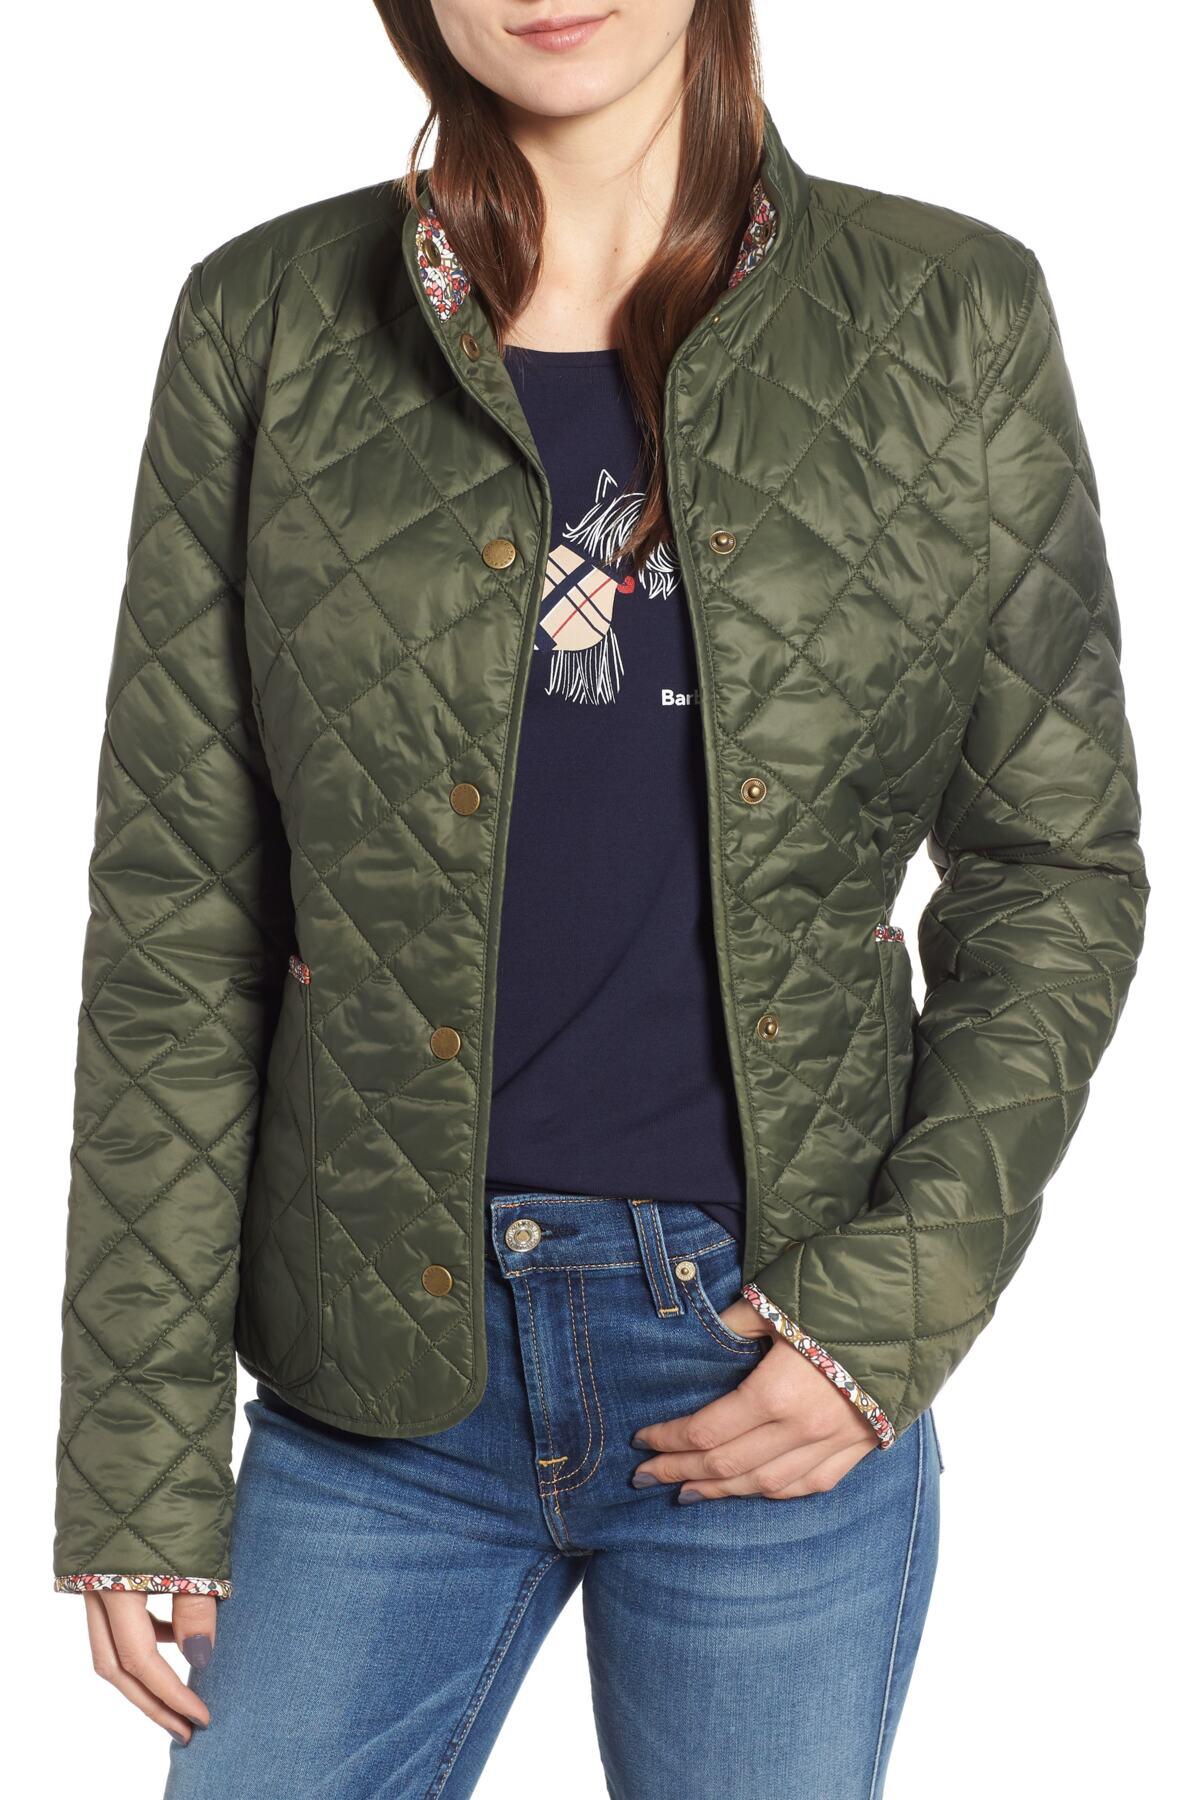 Barbour Evelyn Quilted Jacket Top Sellers, GET 51% OFF, www.perryhall.co.uk